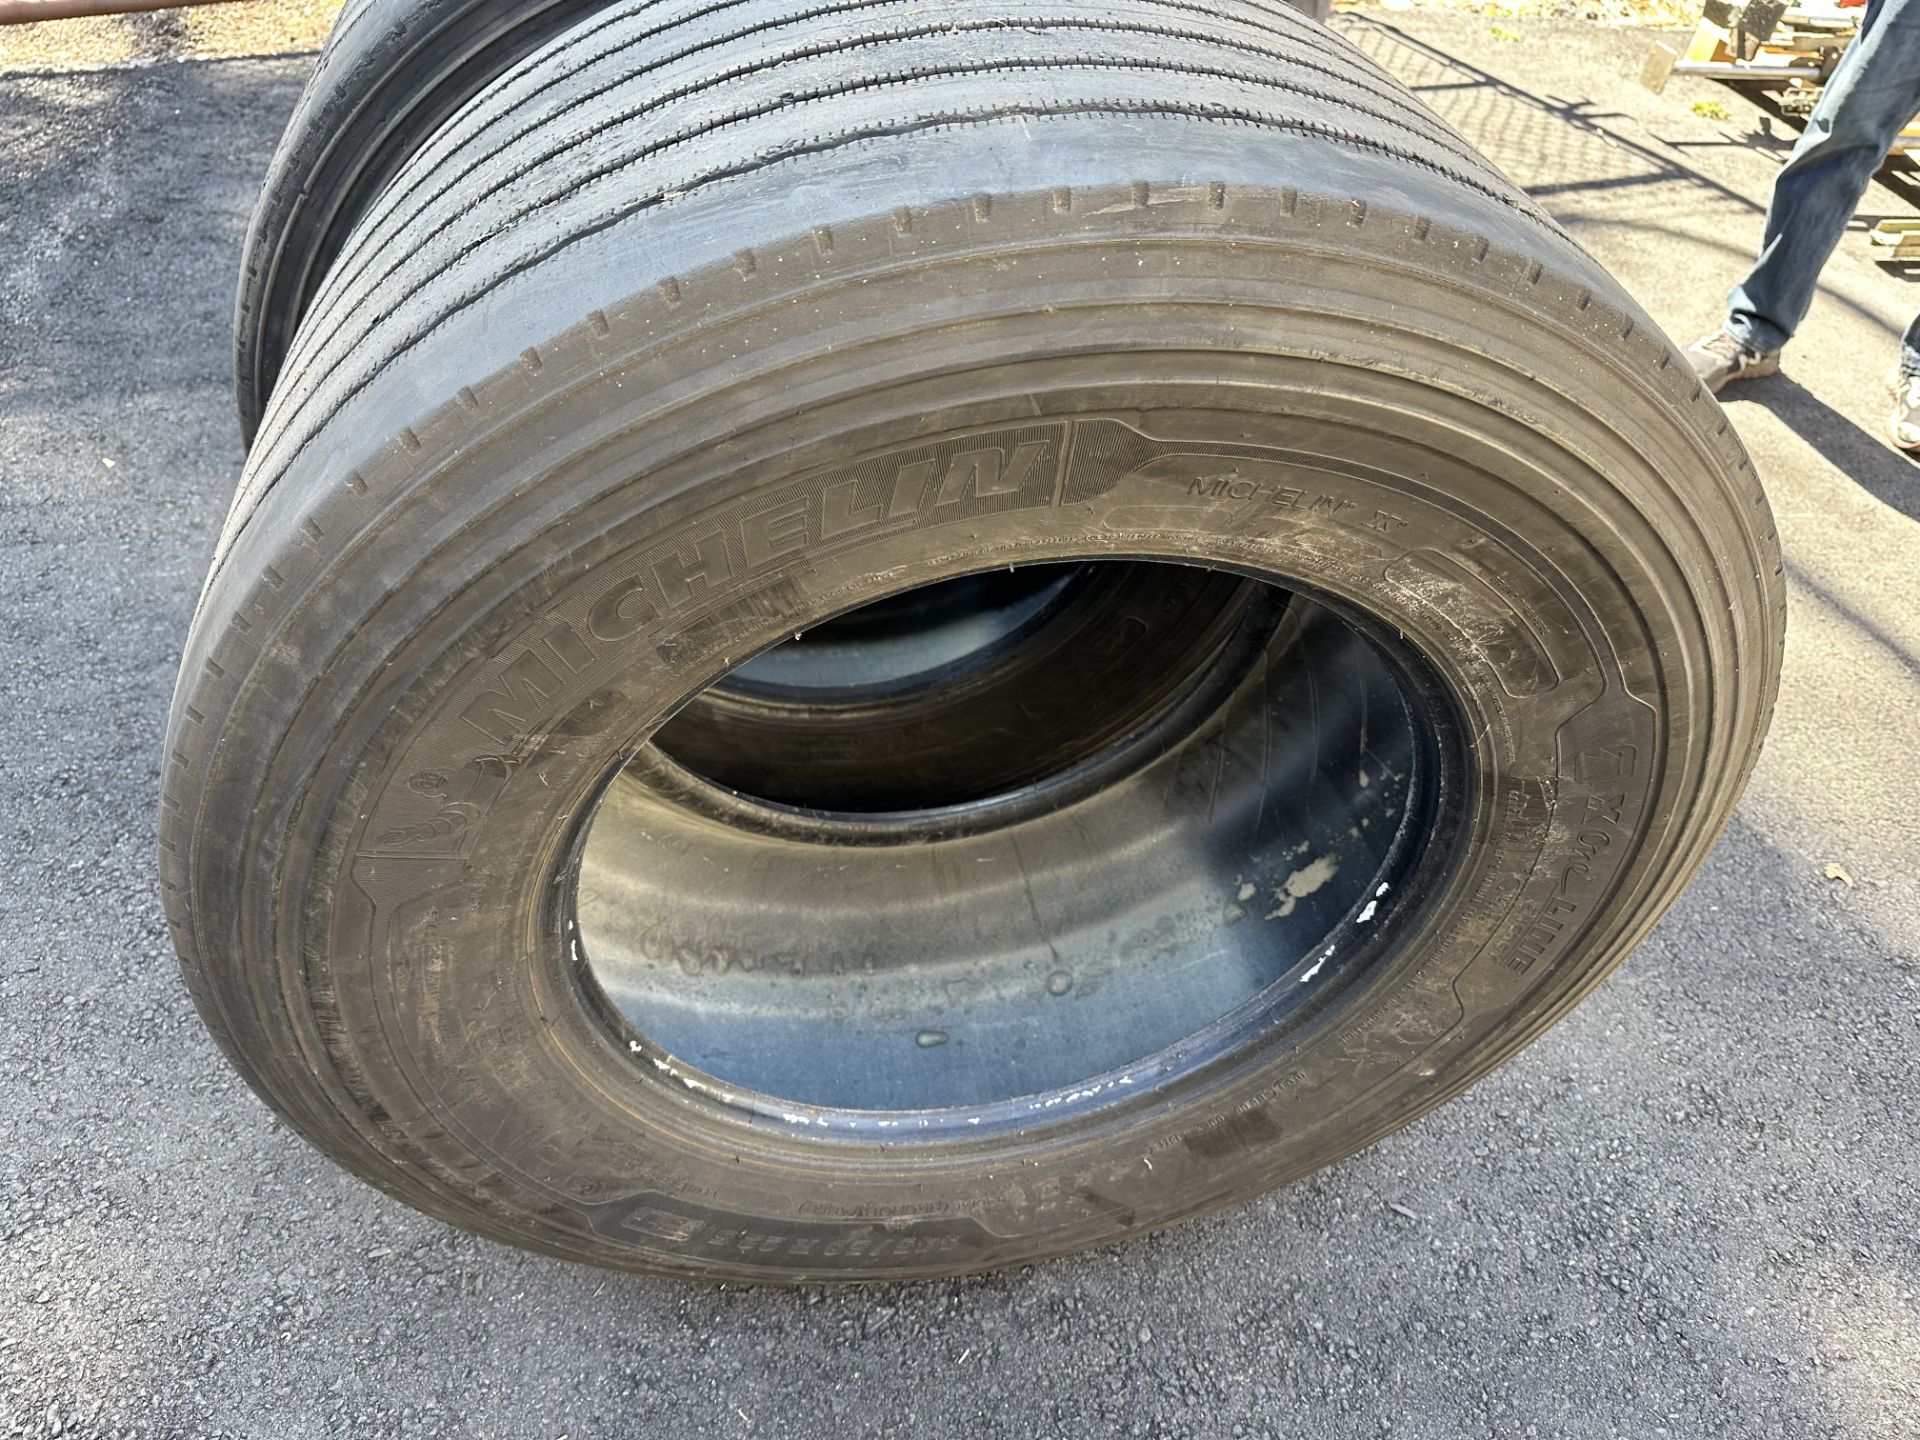 (Lot) (4) Asst. Tubeless Tires c/o: Michelin x One Line 445/50R 22.5 ( Used) - Image 4 of 4